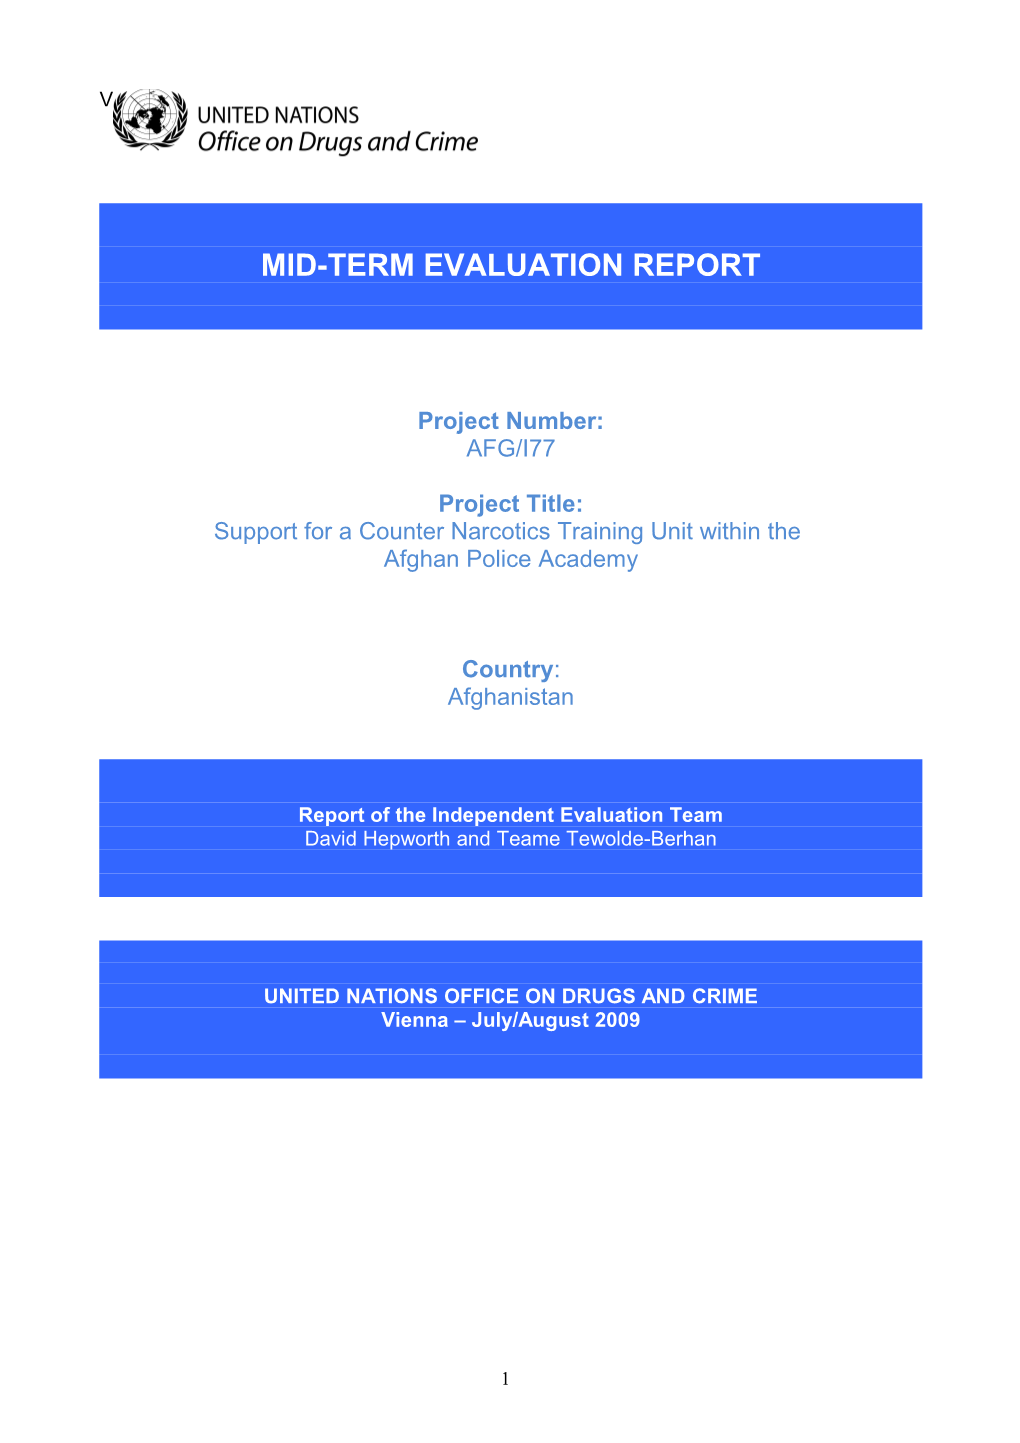 Mid-Term Evaluation Report